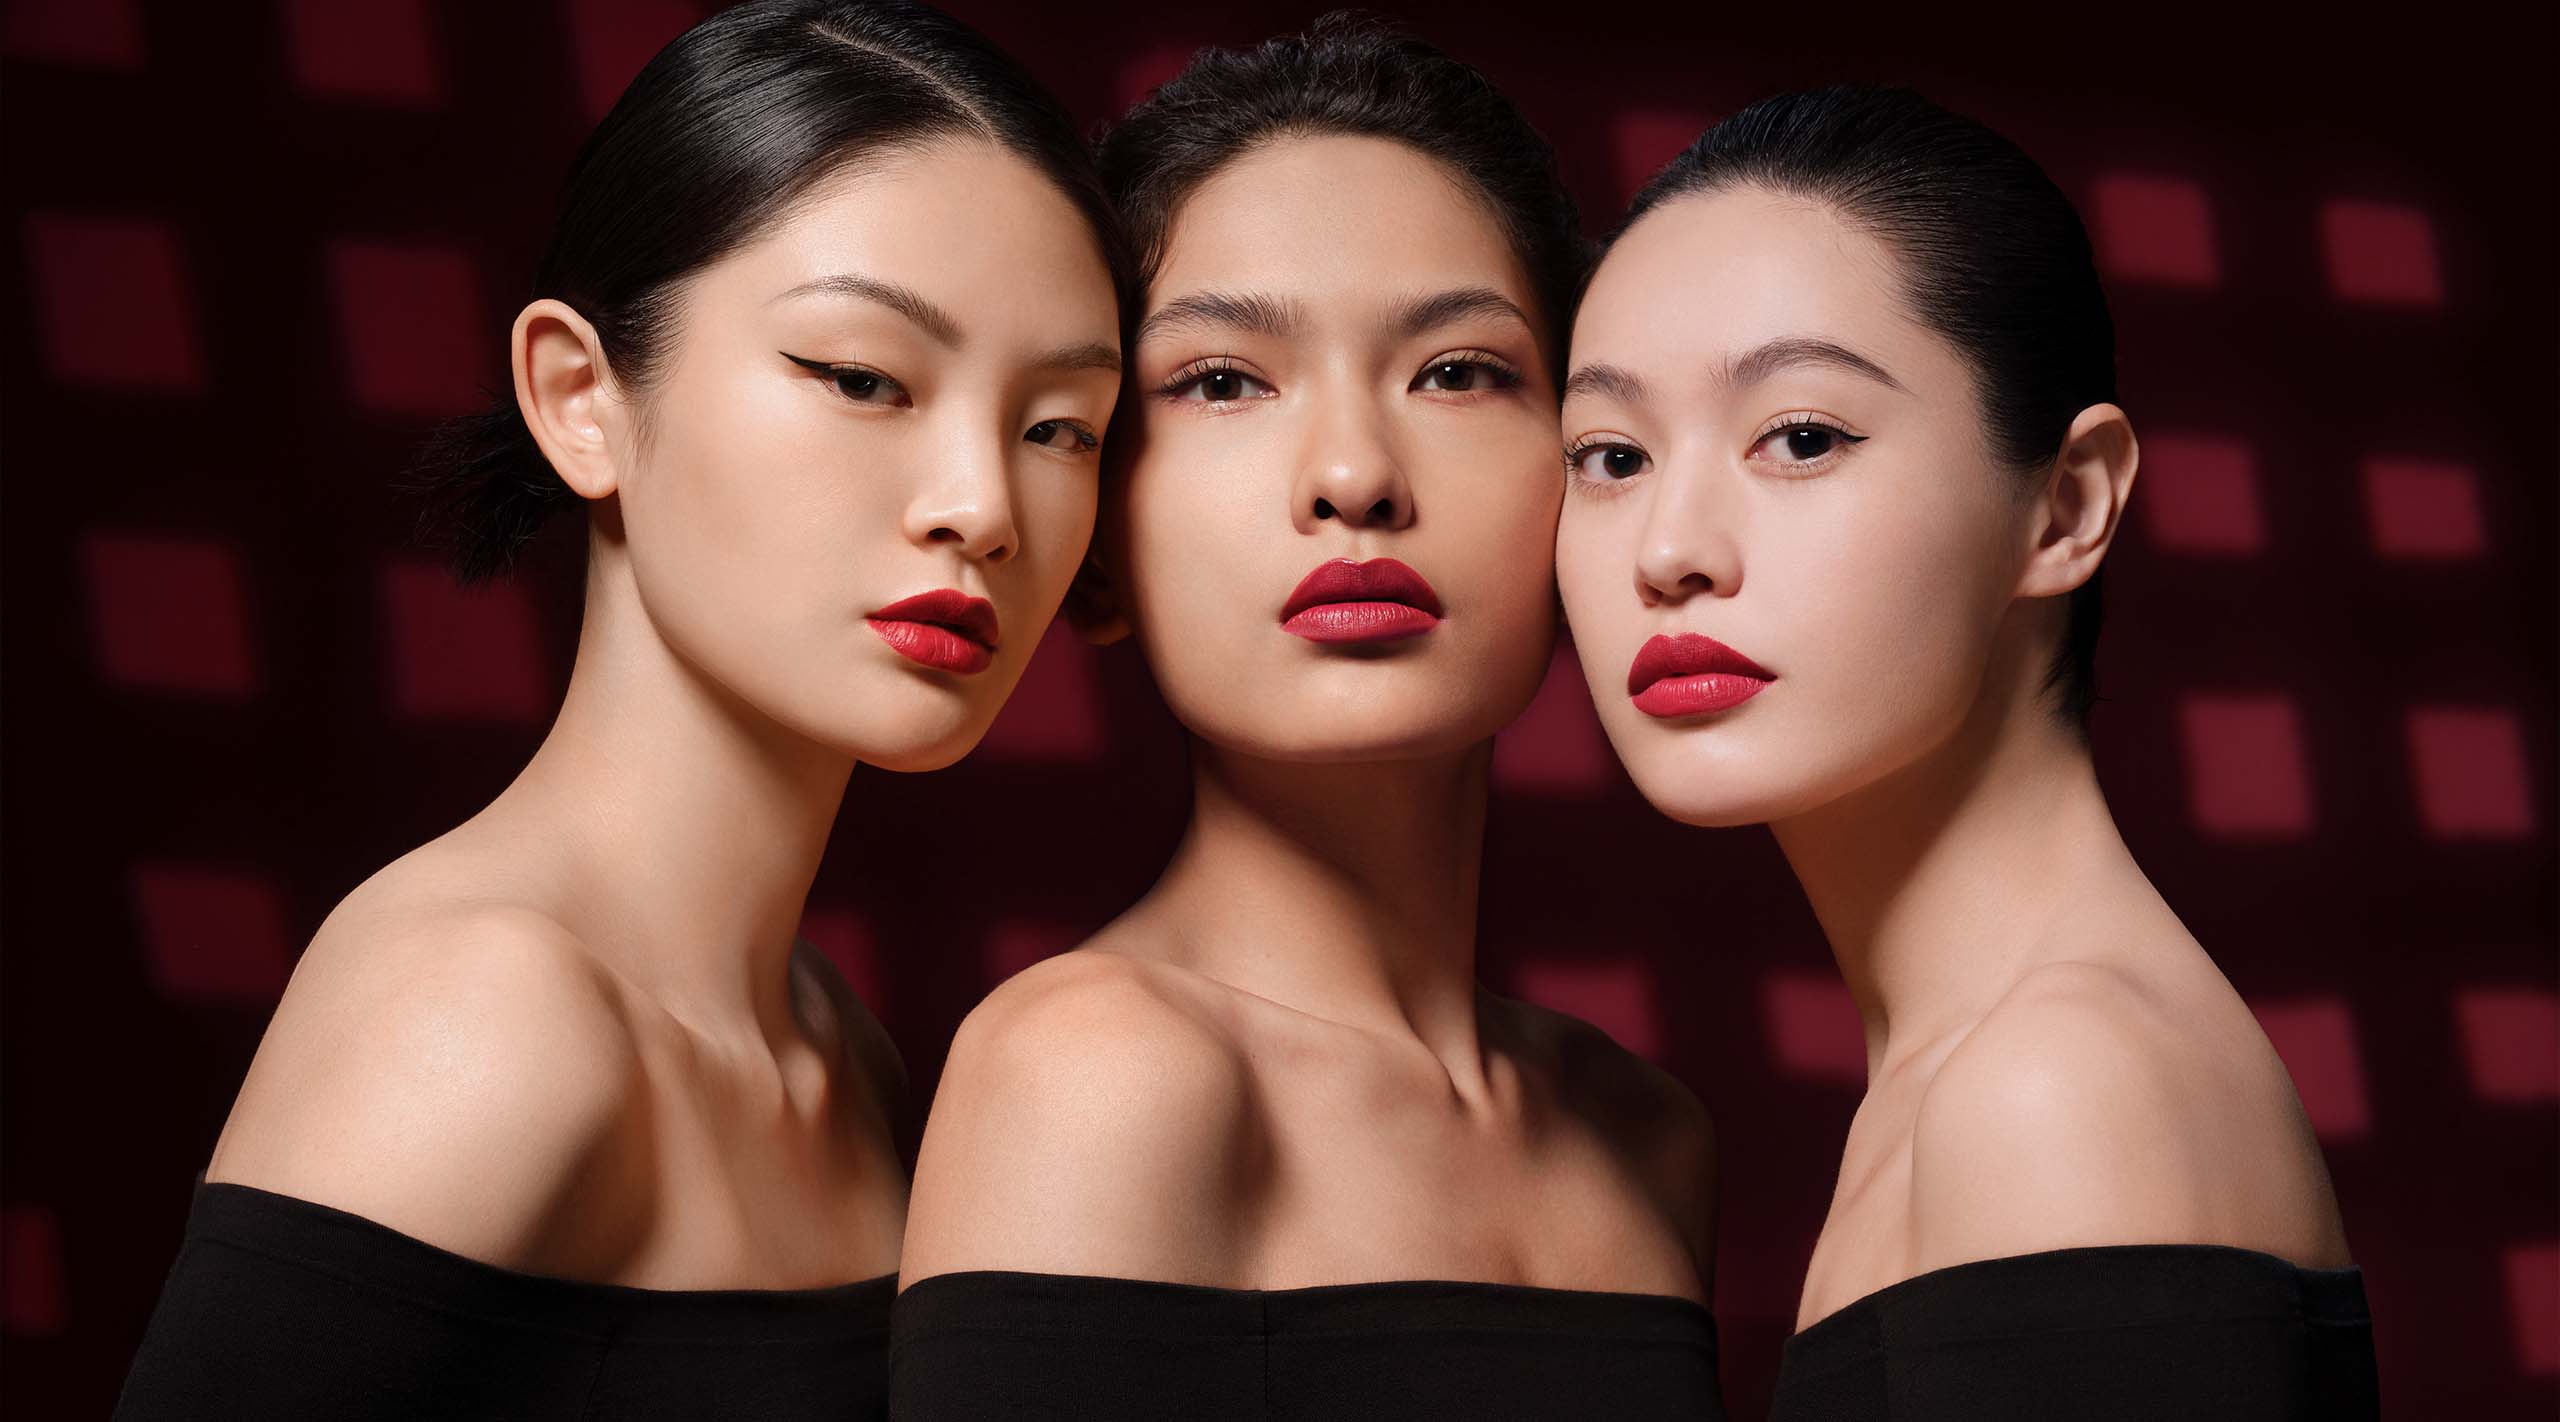 Confidently Power Through the Day in Your Brightest Red Lip With YOU Beauty’s Latest Collection